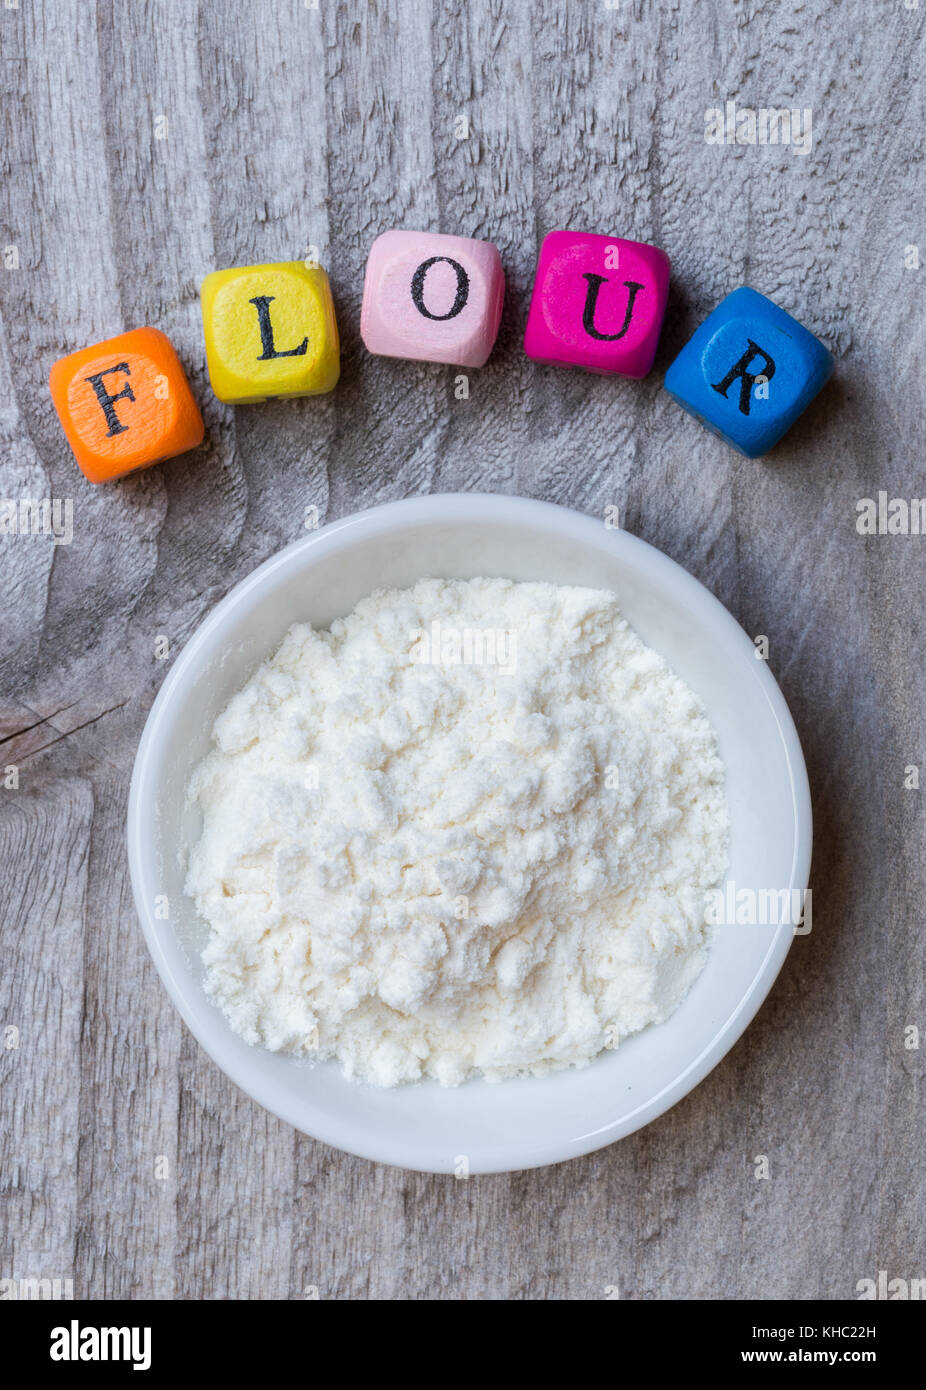 Flour in bowl with letter cube on wooden background. Stock Photo